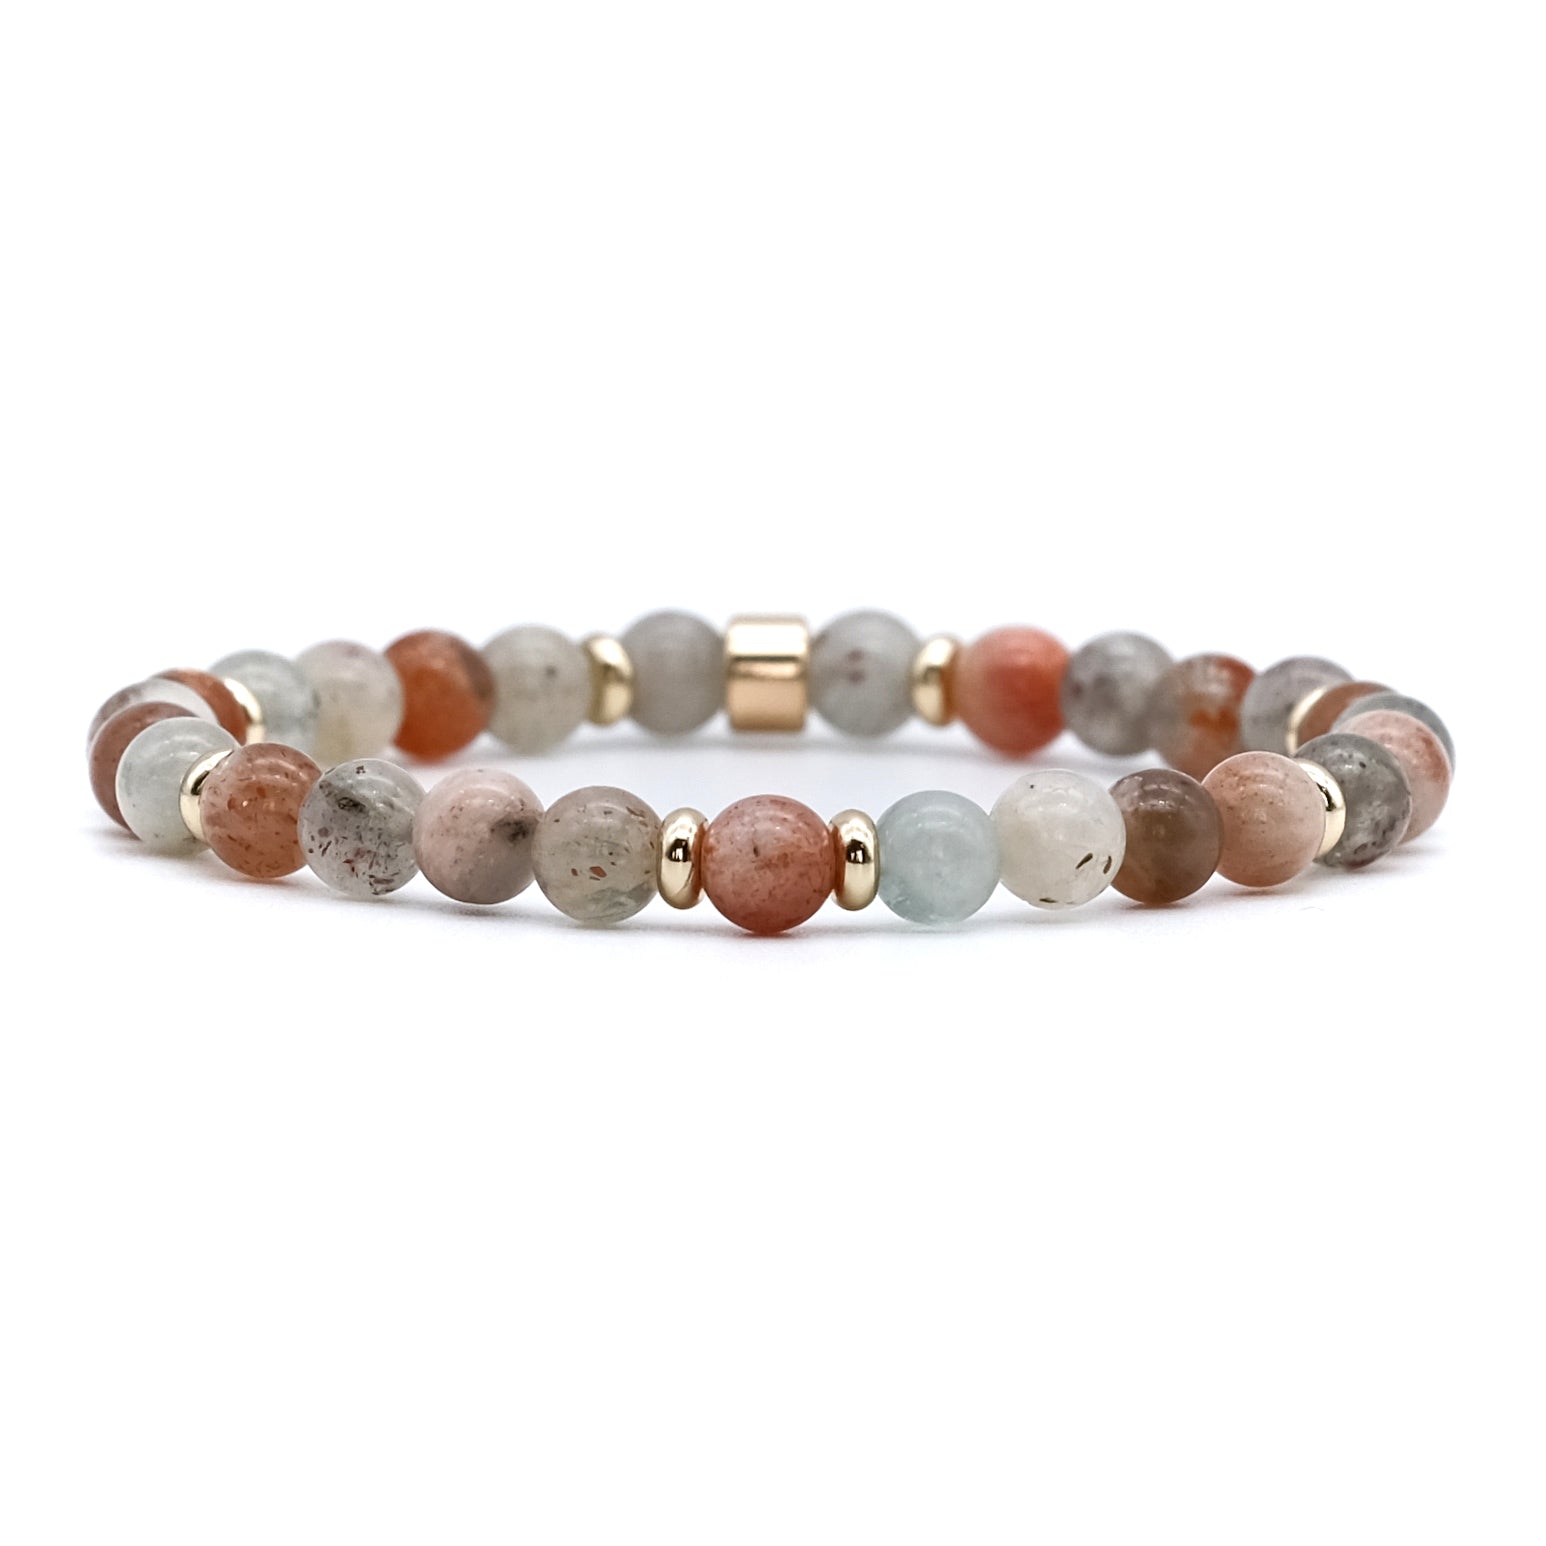 Arusha sunstone gemstone bracelet in 6mm with 18ct gold accessories